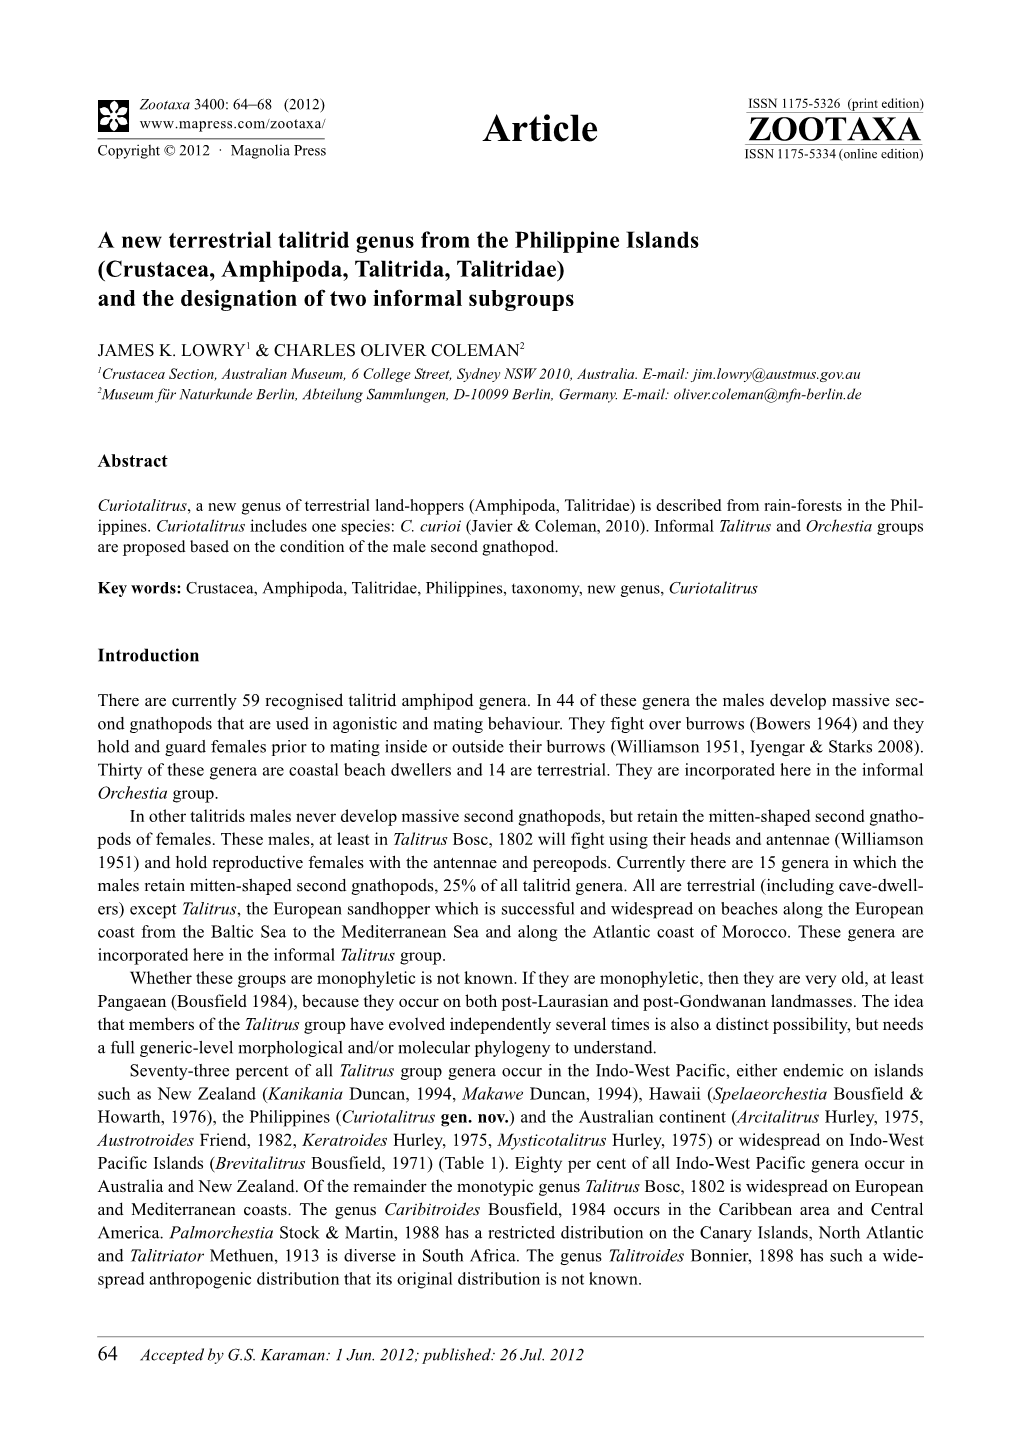 A New Terrestrial Talitrid Genus from the Philippine Islands (Crustacea, Amphipoda, Talitrida, Talitridae) and the Designation of Two Informal Subgroups